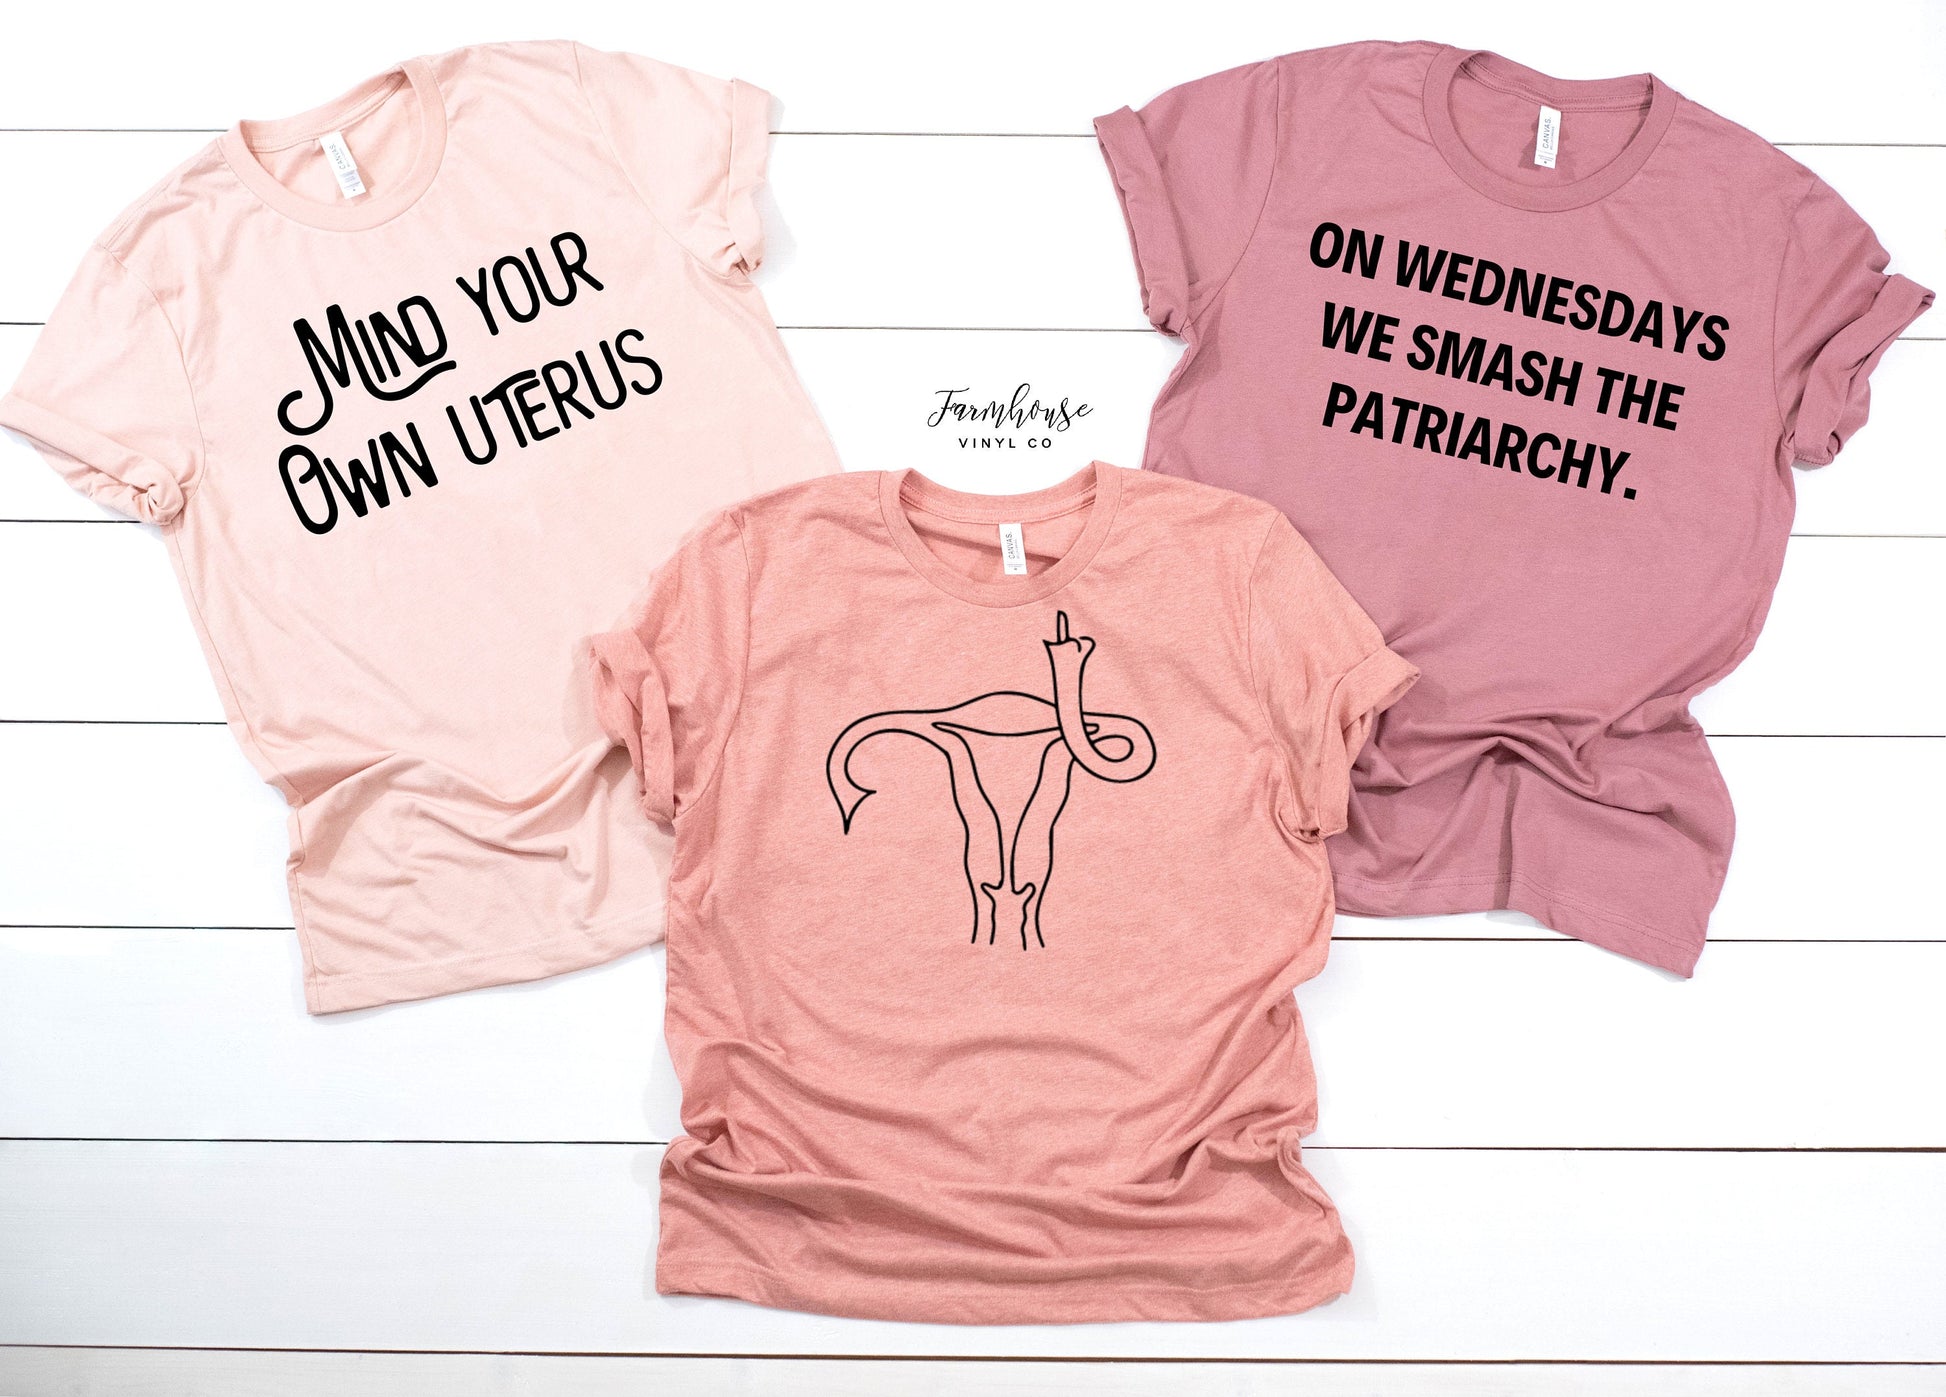 On Wednesdays We Smash the Patriarchy Shirts / Mommy Me Shirts / Womens Empowerment TShirt / Womens March Oct 2nd 2021 / Womens Group Shirts - Farmhouse Vinyl Co